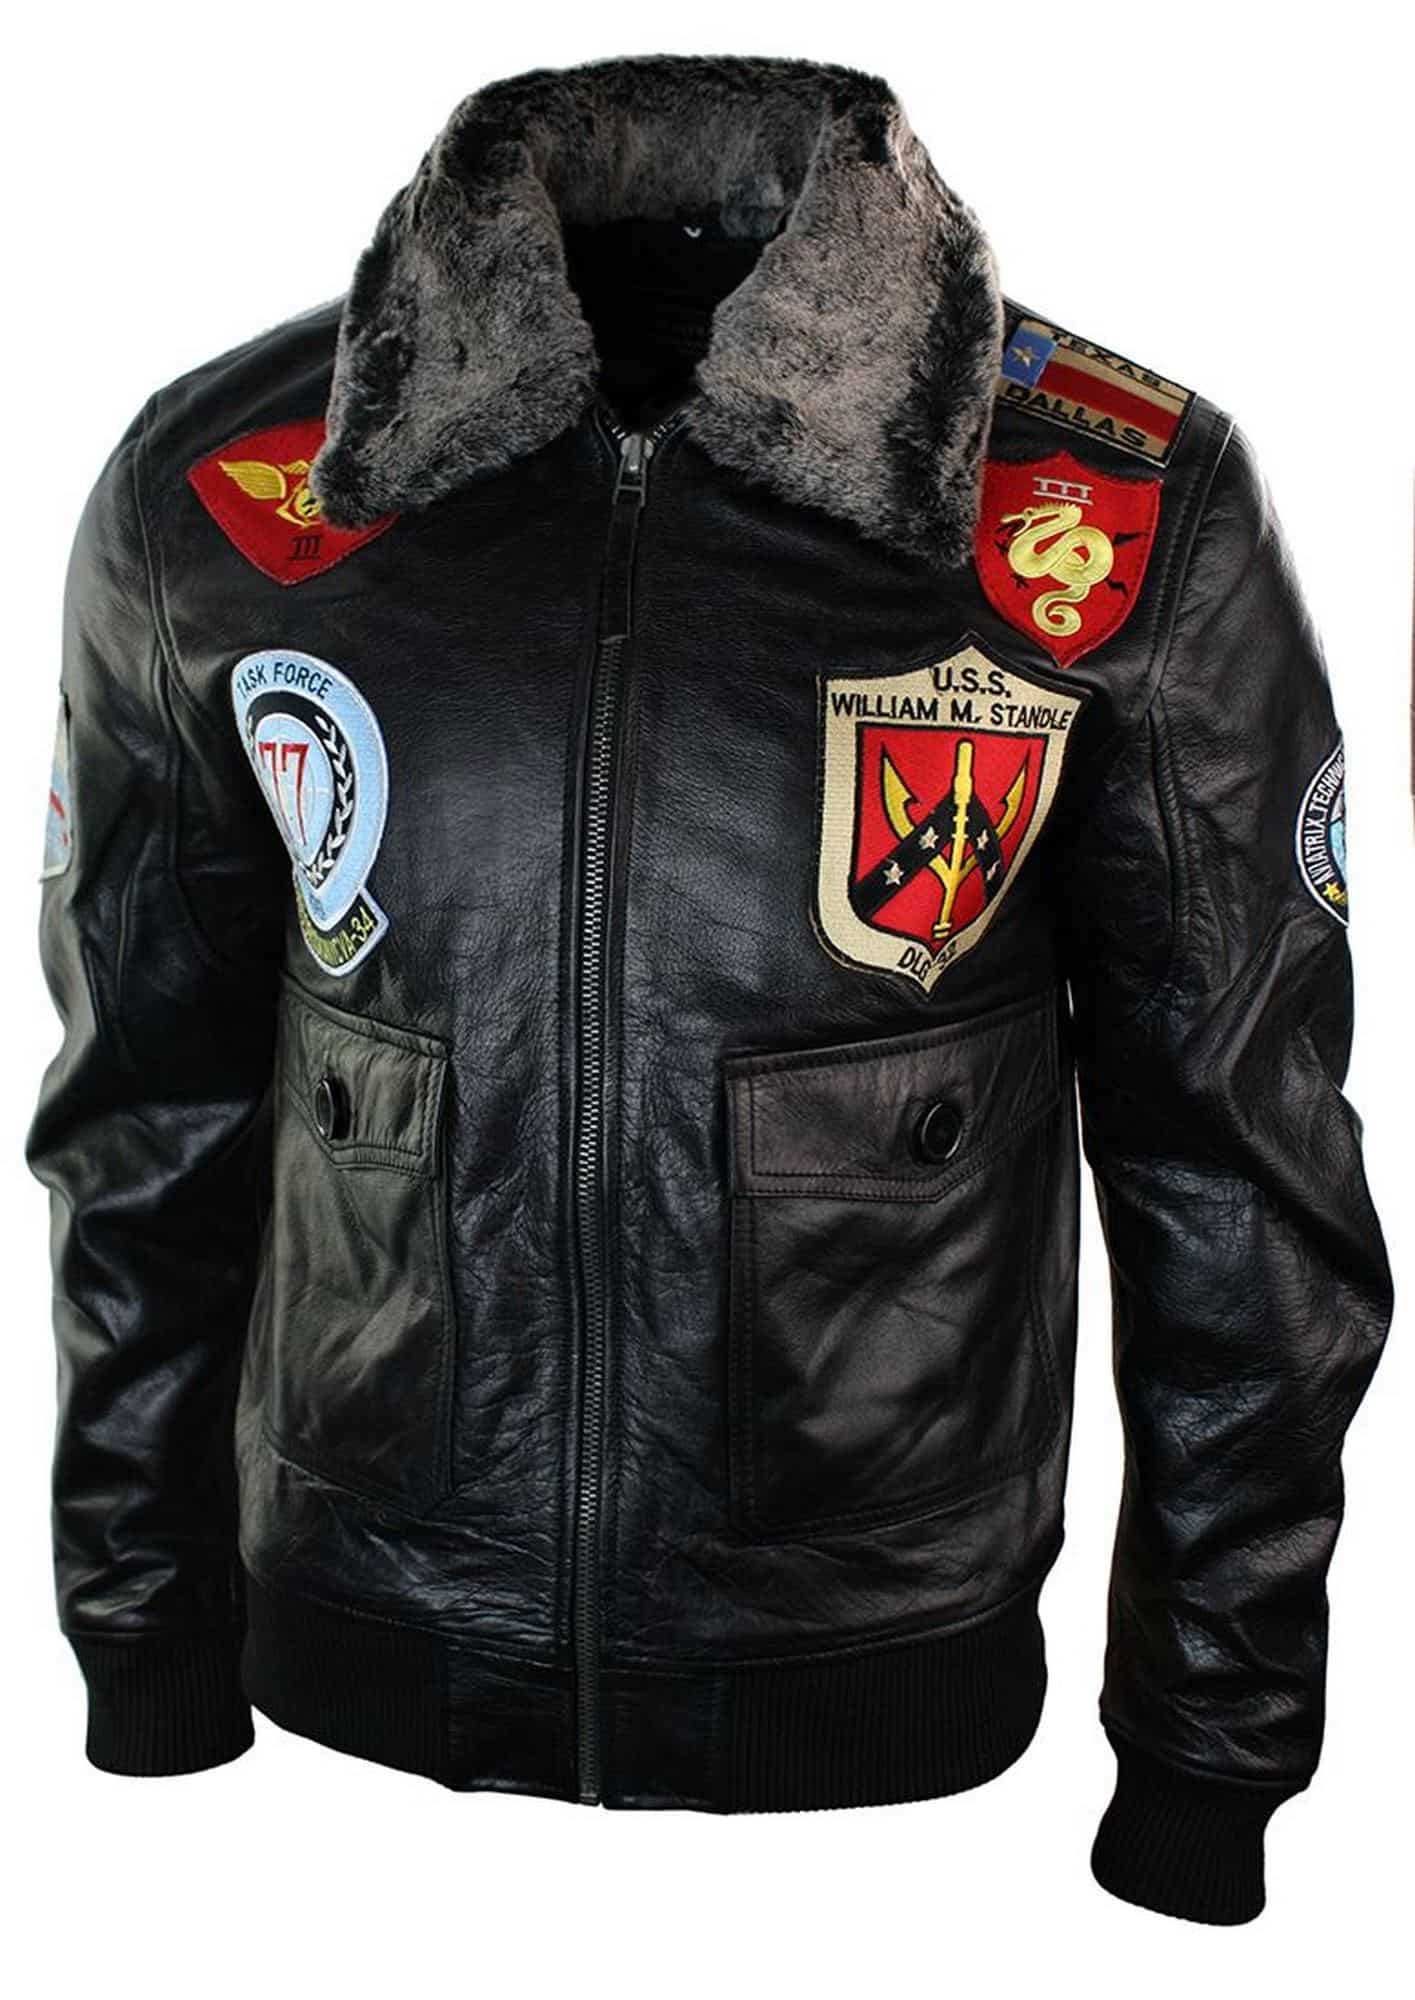 Leather Air Force Bomber Jacket - Airforce Military